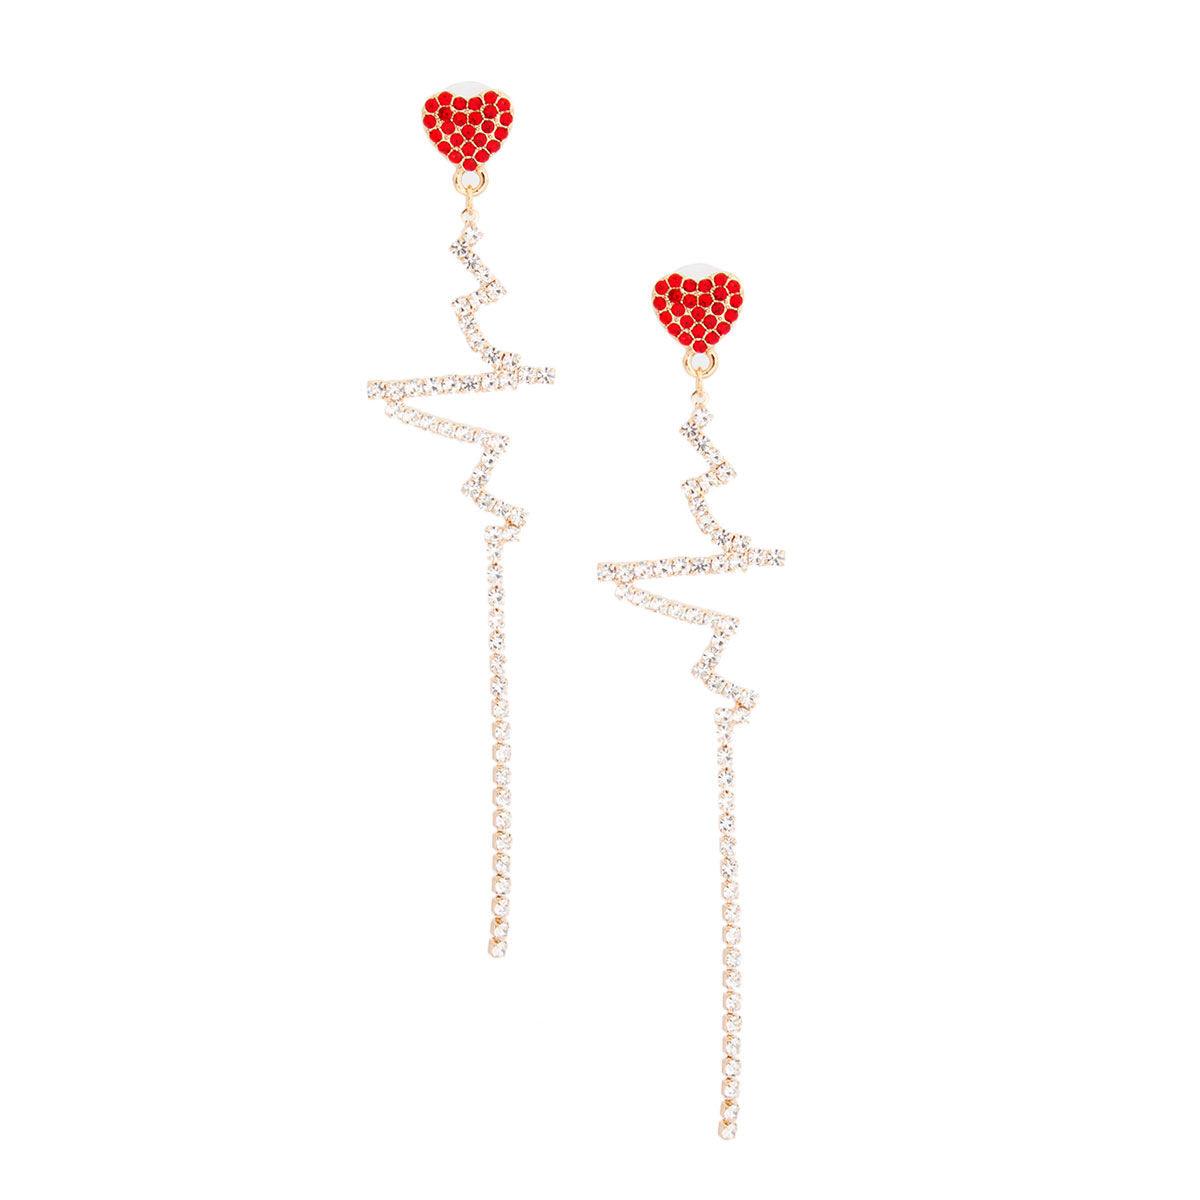 Heartbeat Earrings: Where Gold Meets Red in Stunning Fashion Jewelry